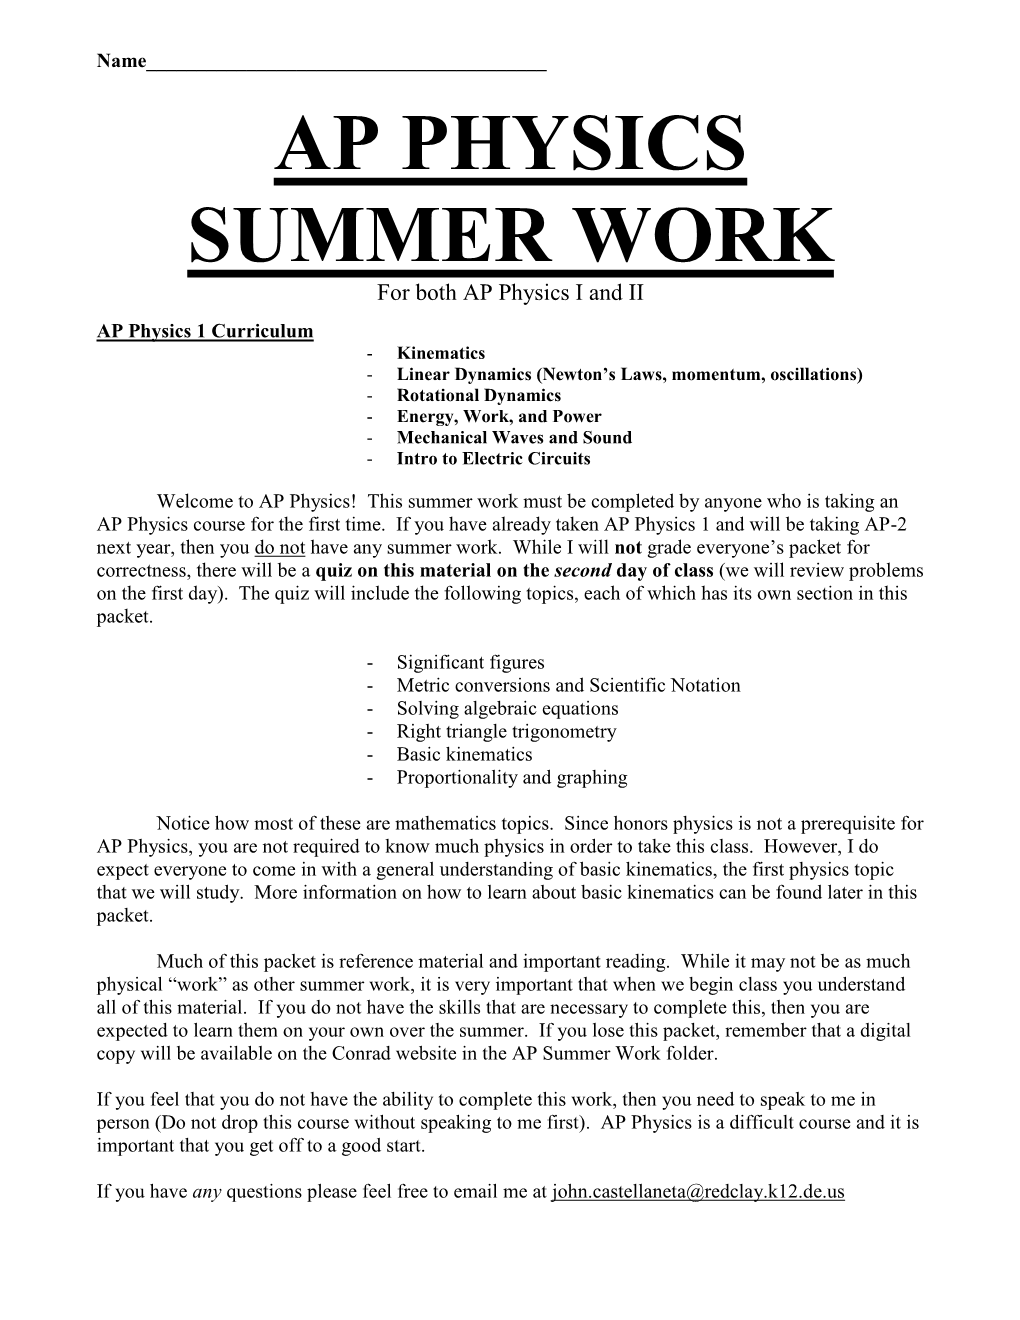 AP PHYSICS SUMMER WORK for Both AP Physics I and II